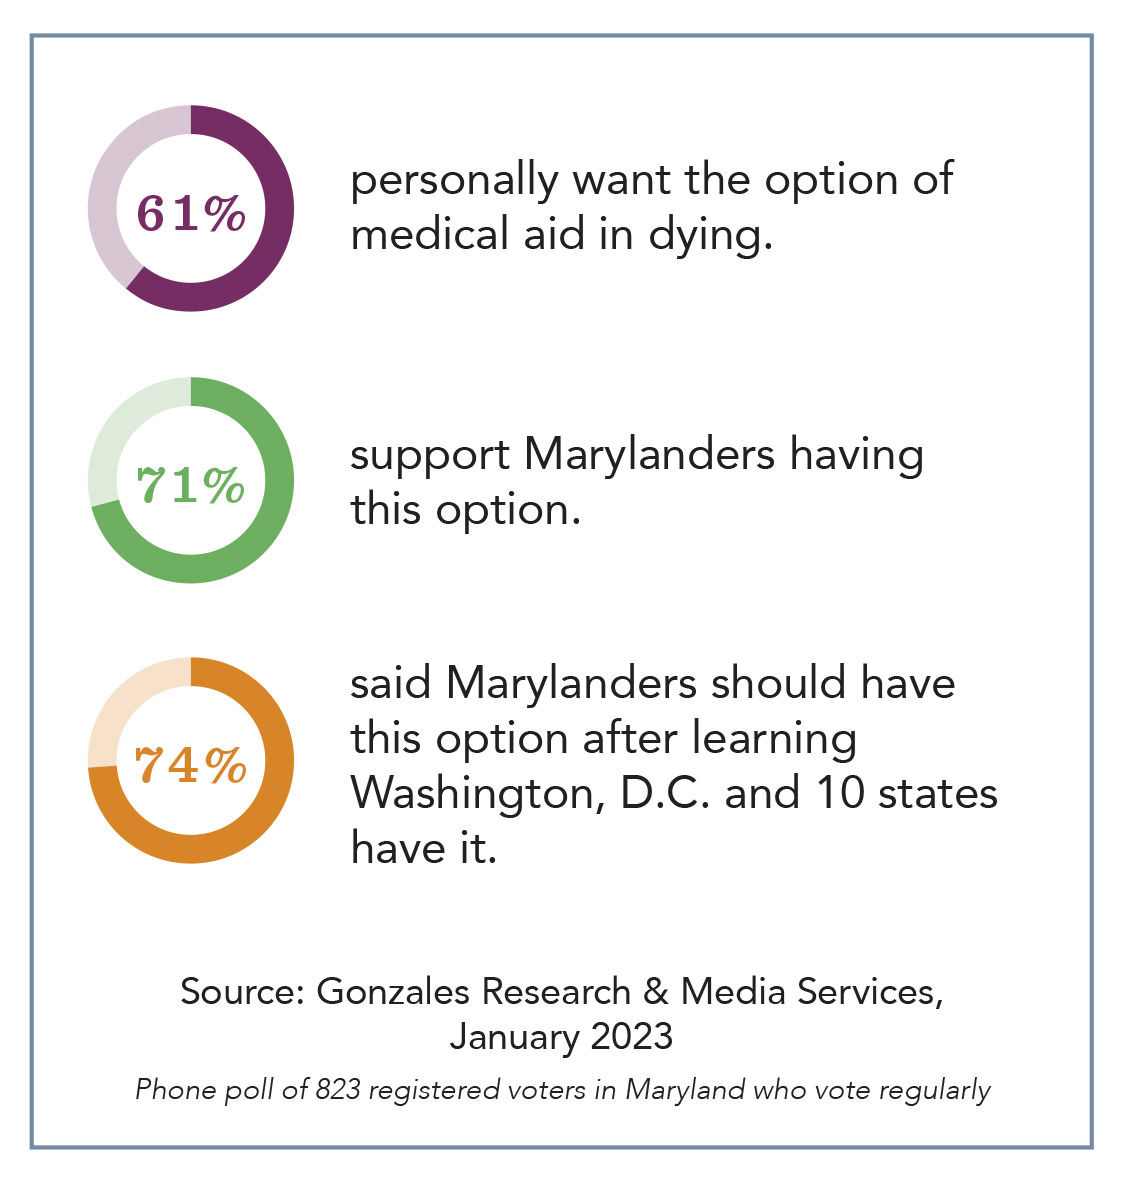 2023 Polling Data infographic showing broad support for Medical Aid in Dying in Maryland